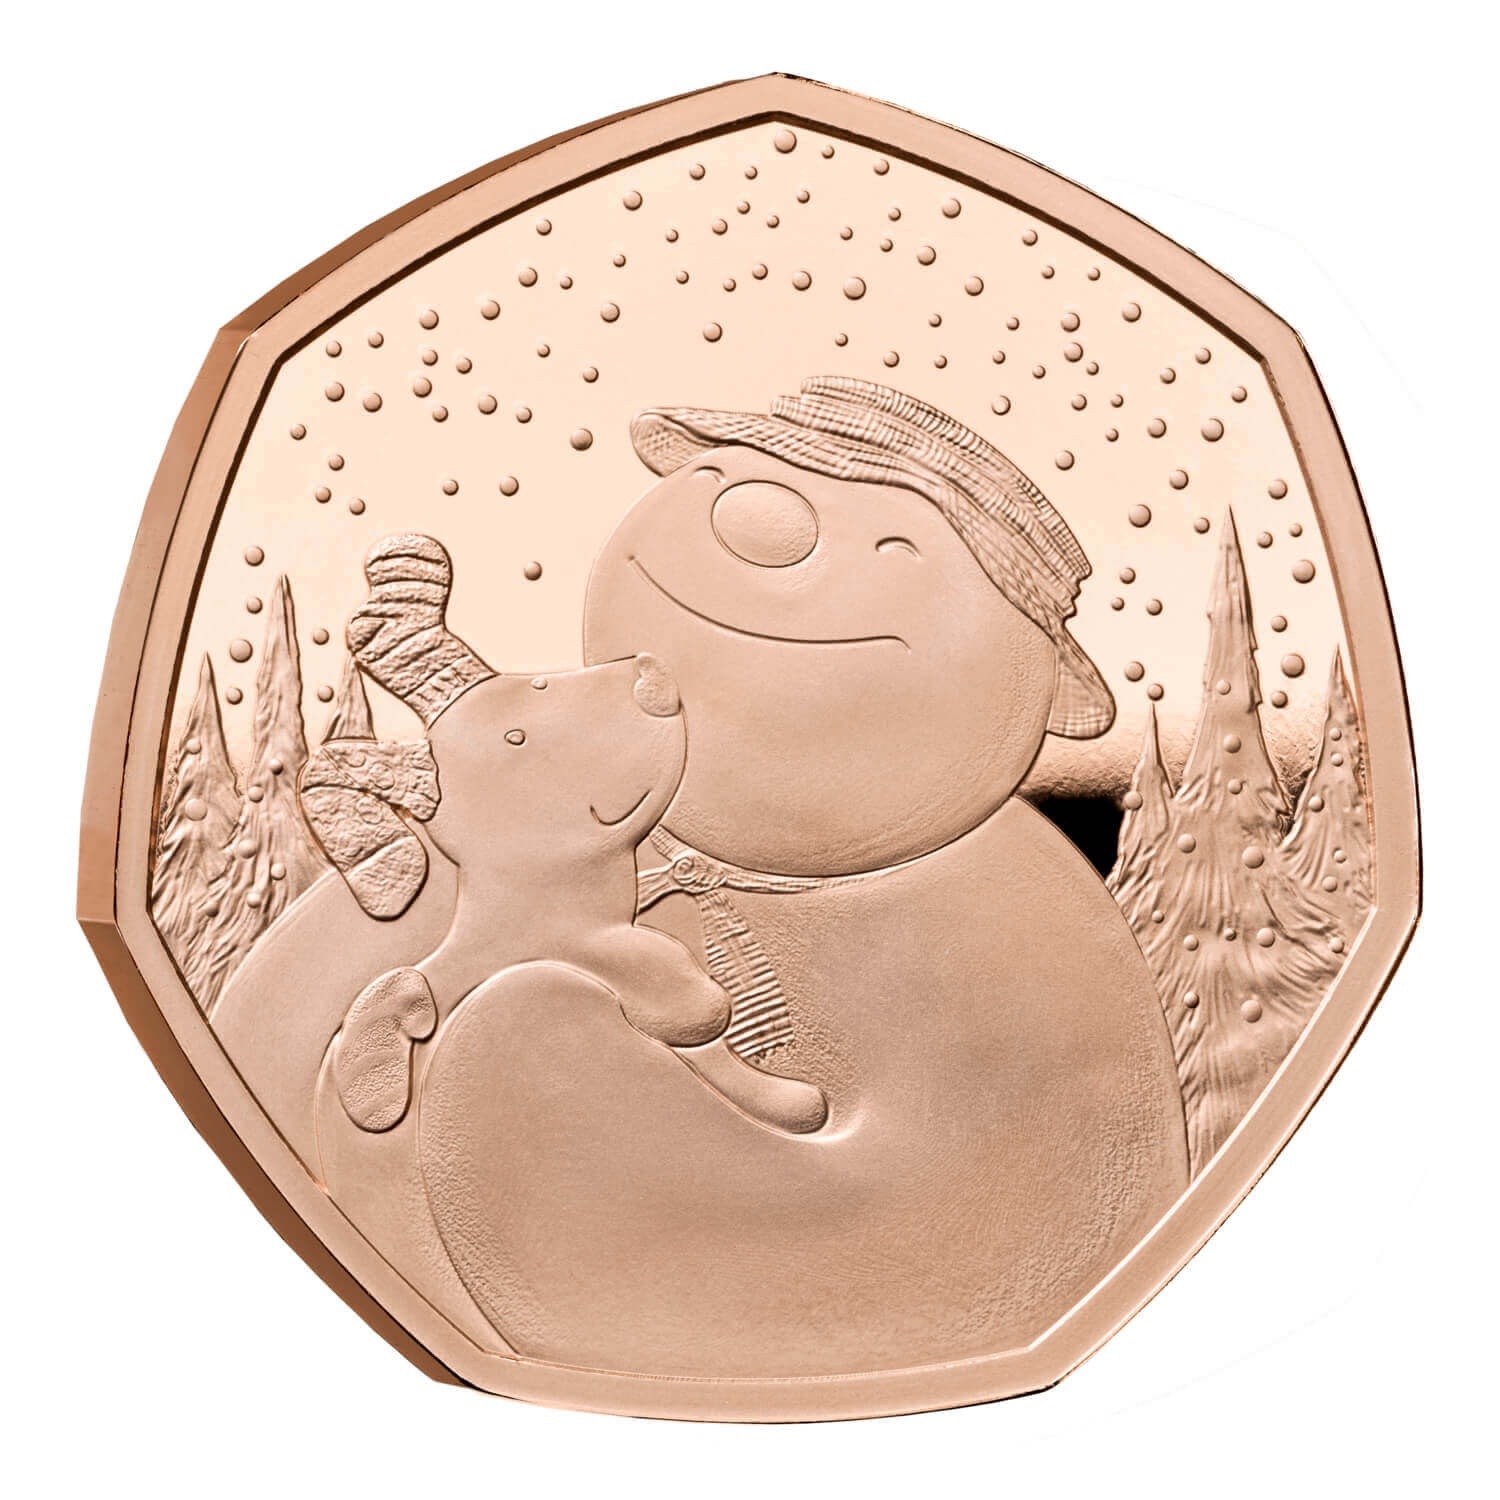 (W185.50.P.2022.UK22SMGP) United Kingdom 50 Pence The Snowman 2022 - Proof gold Reverse (zoom)